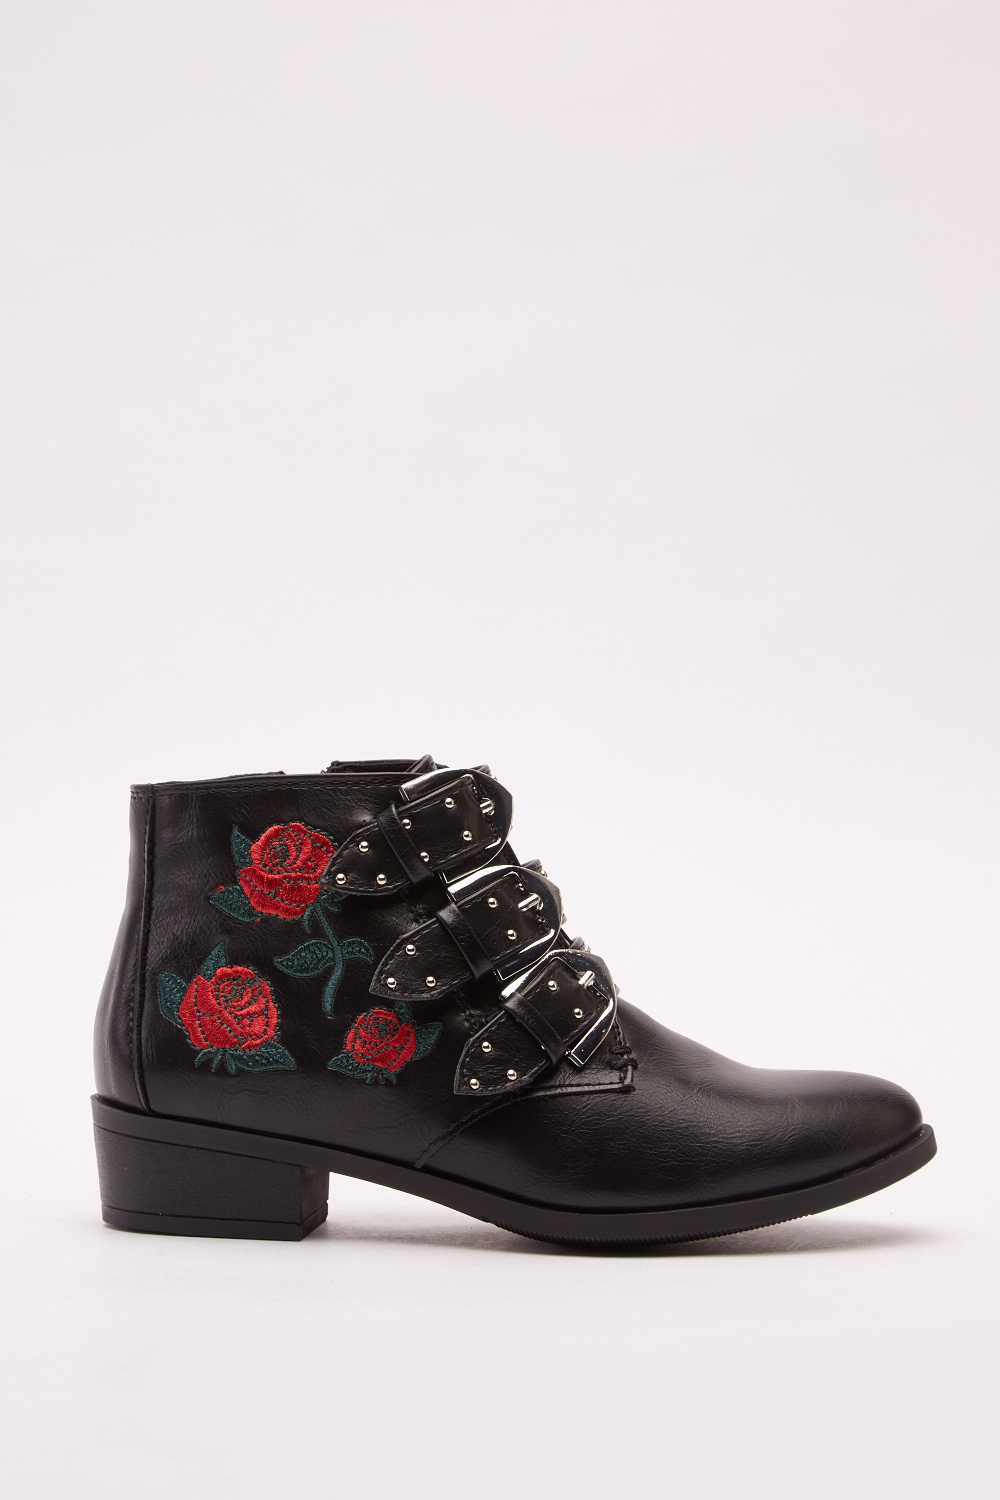 rose embroidered boots